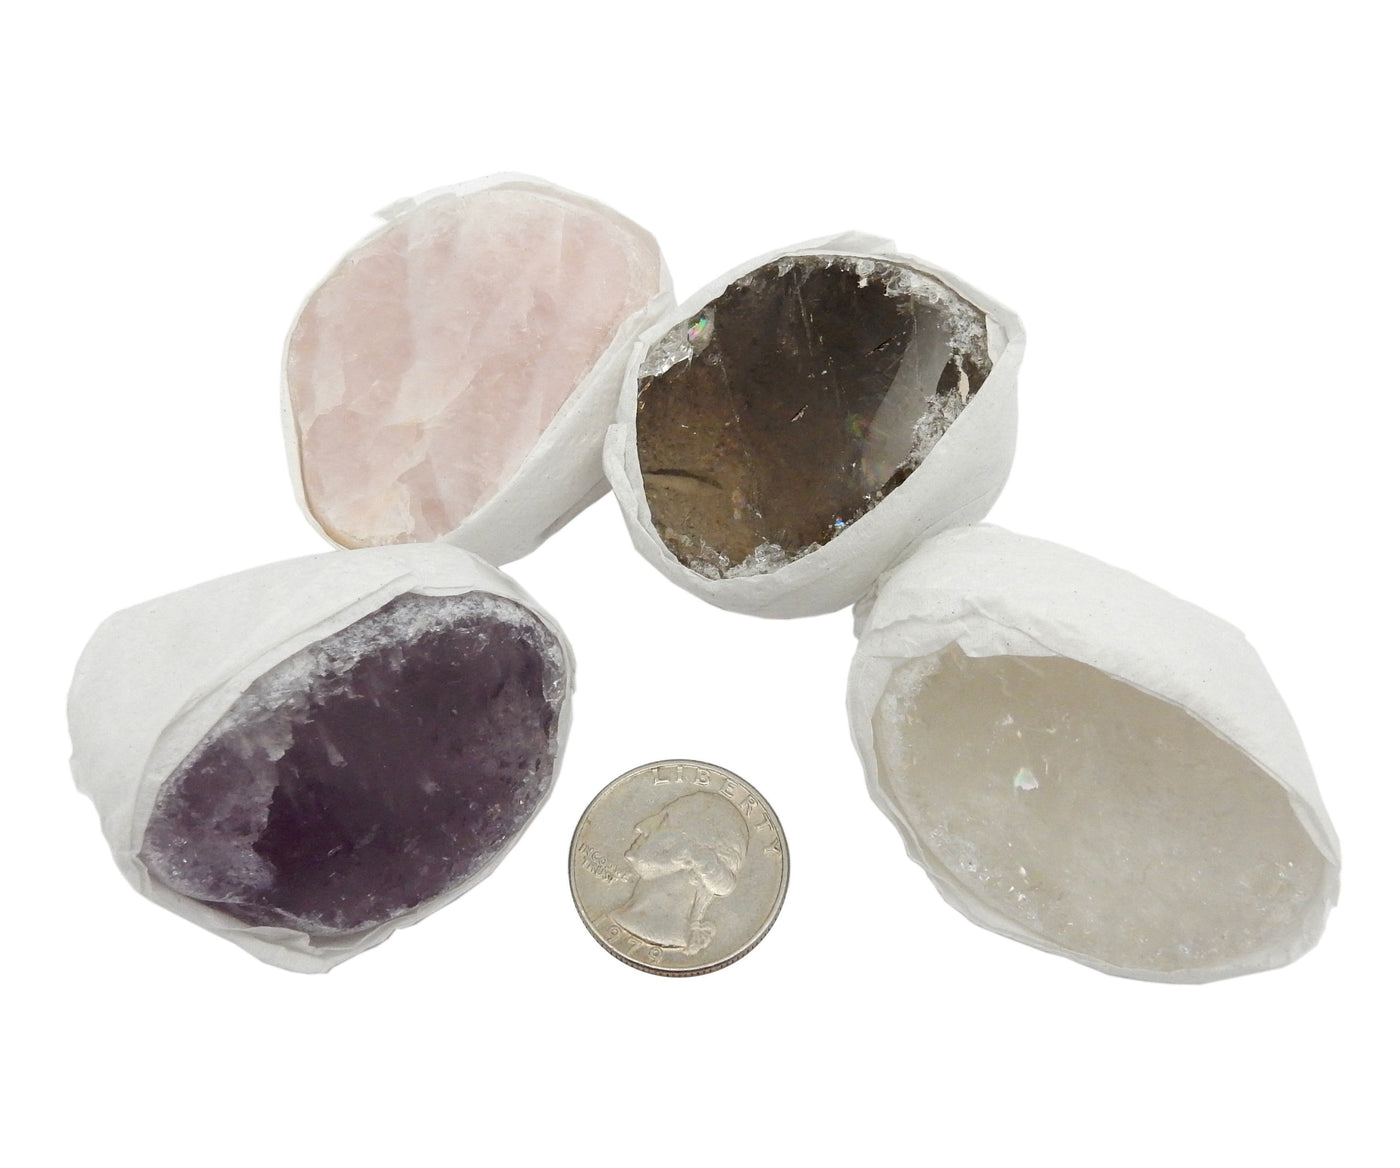 assorted seer stones with quarter for approximate size reference